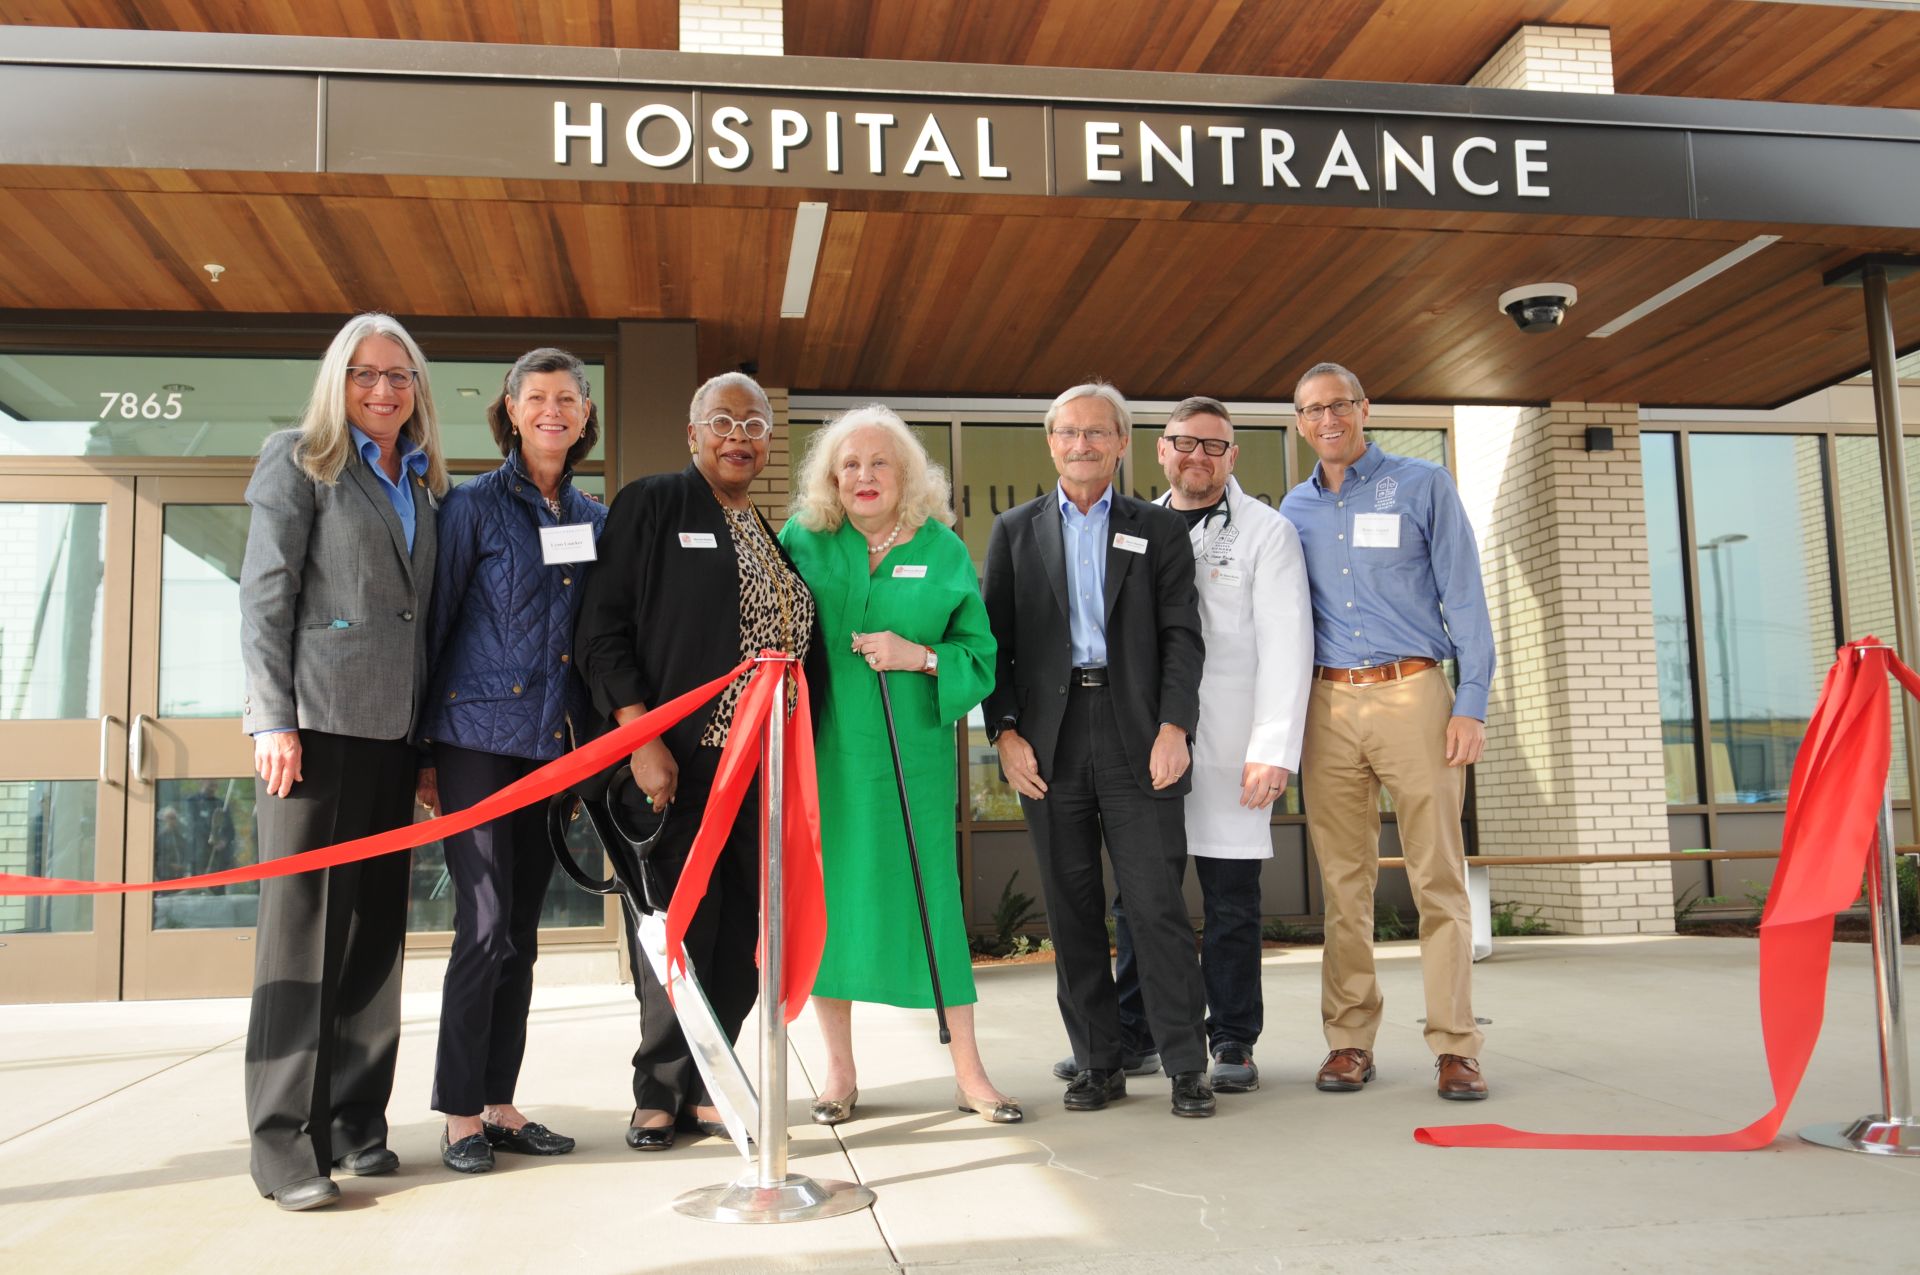 OHS opens new Community Veterinary Hospital. Photo shows executive staff and board members posing at the ribbon cutting ceremony.